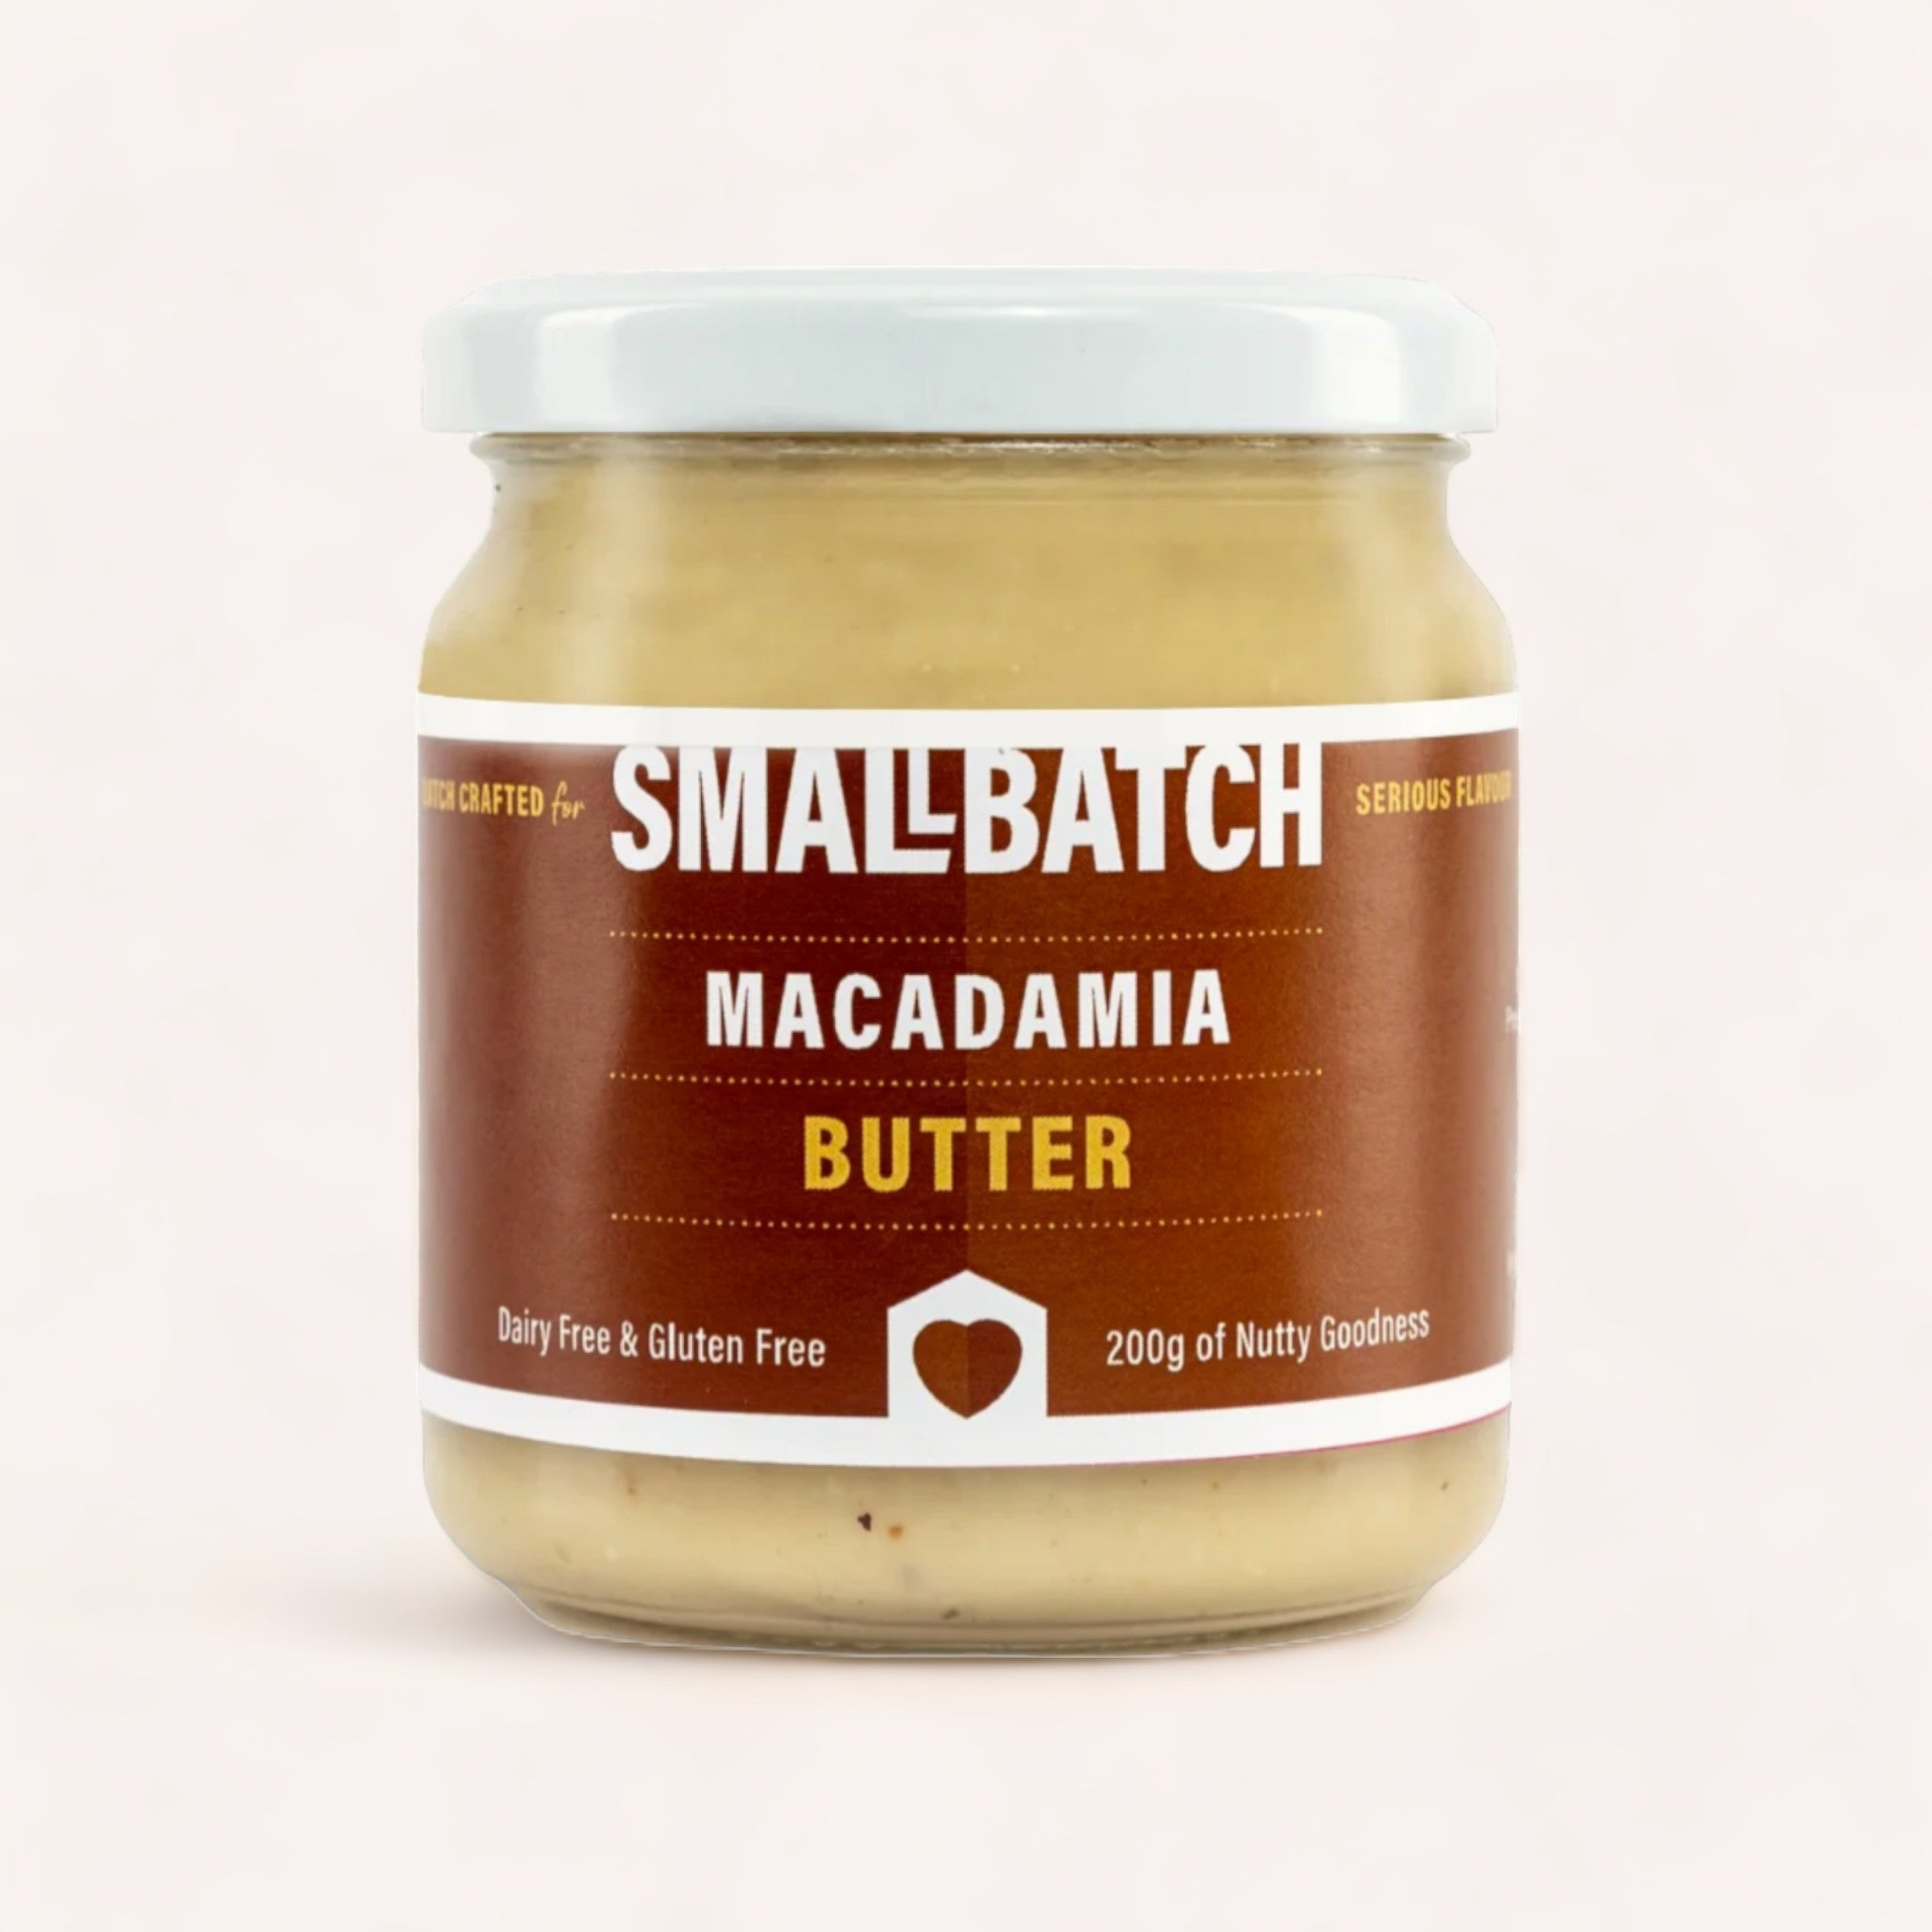 macadamia butter spread by small batch